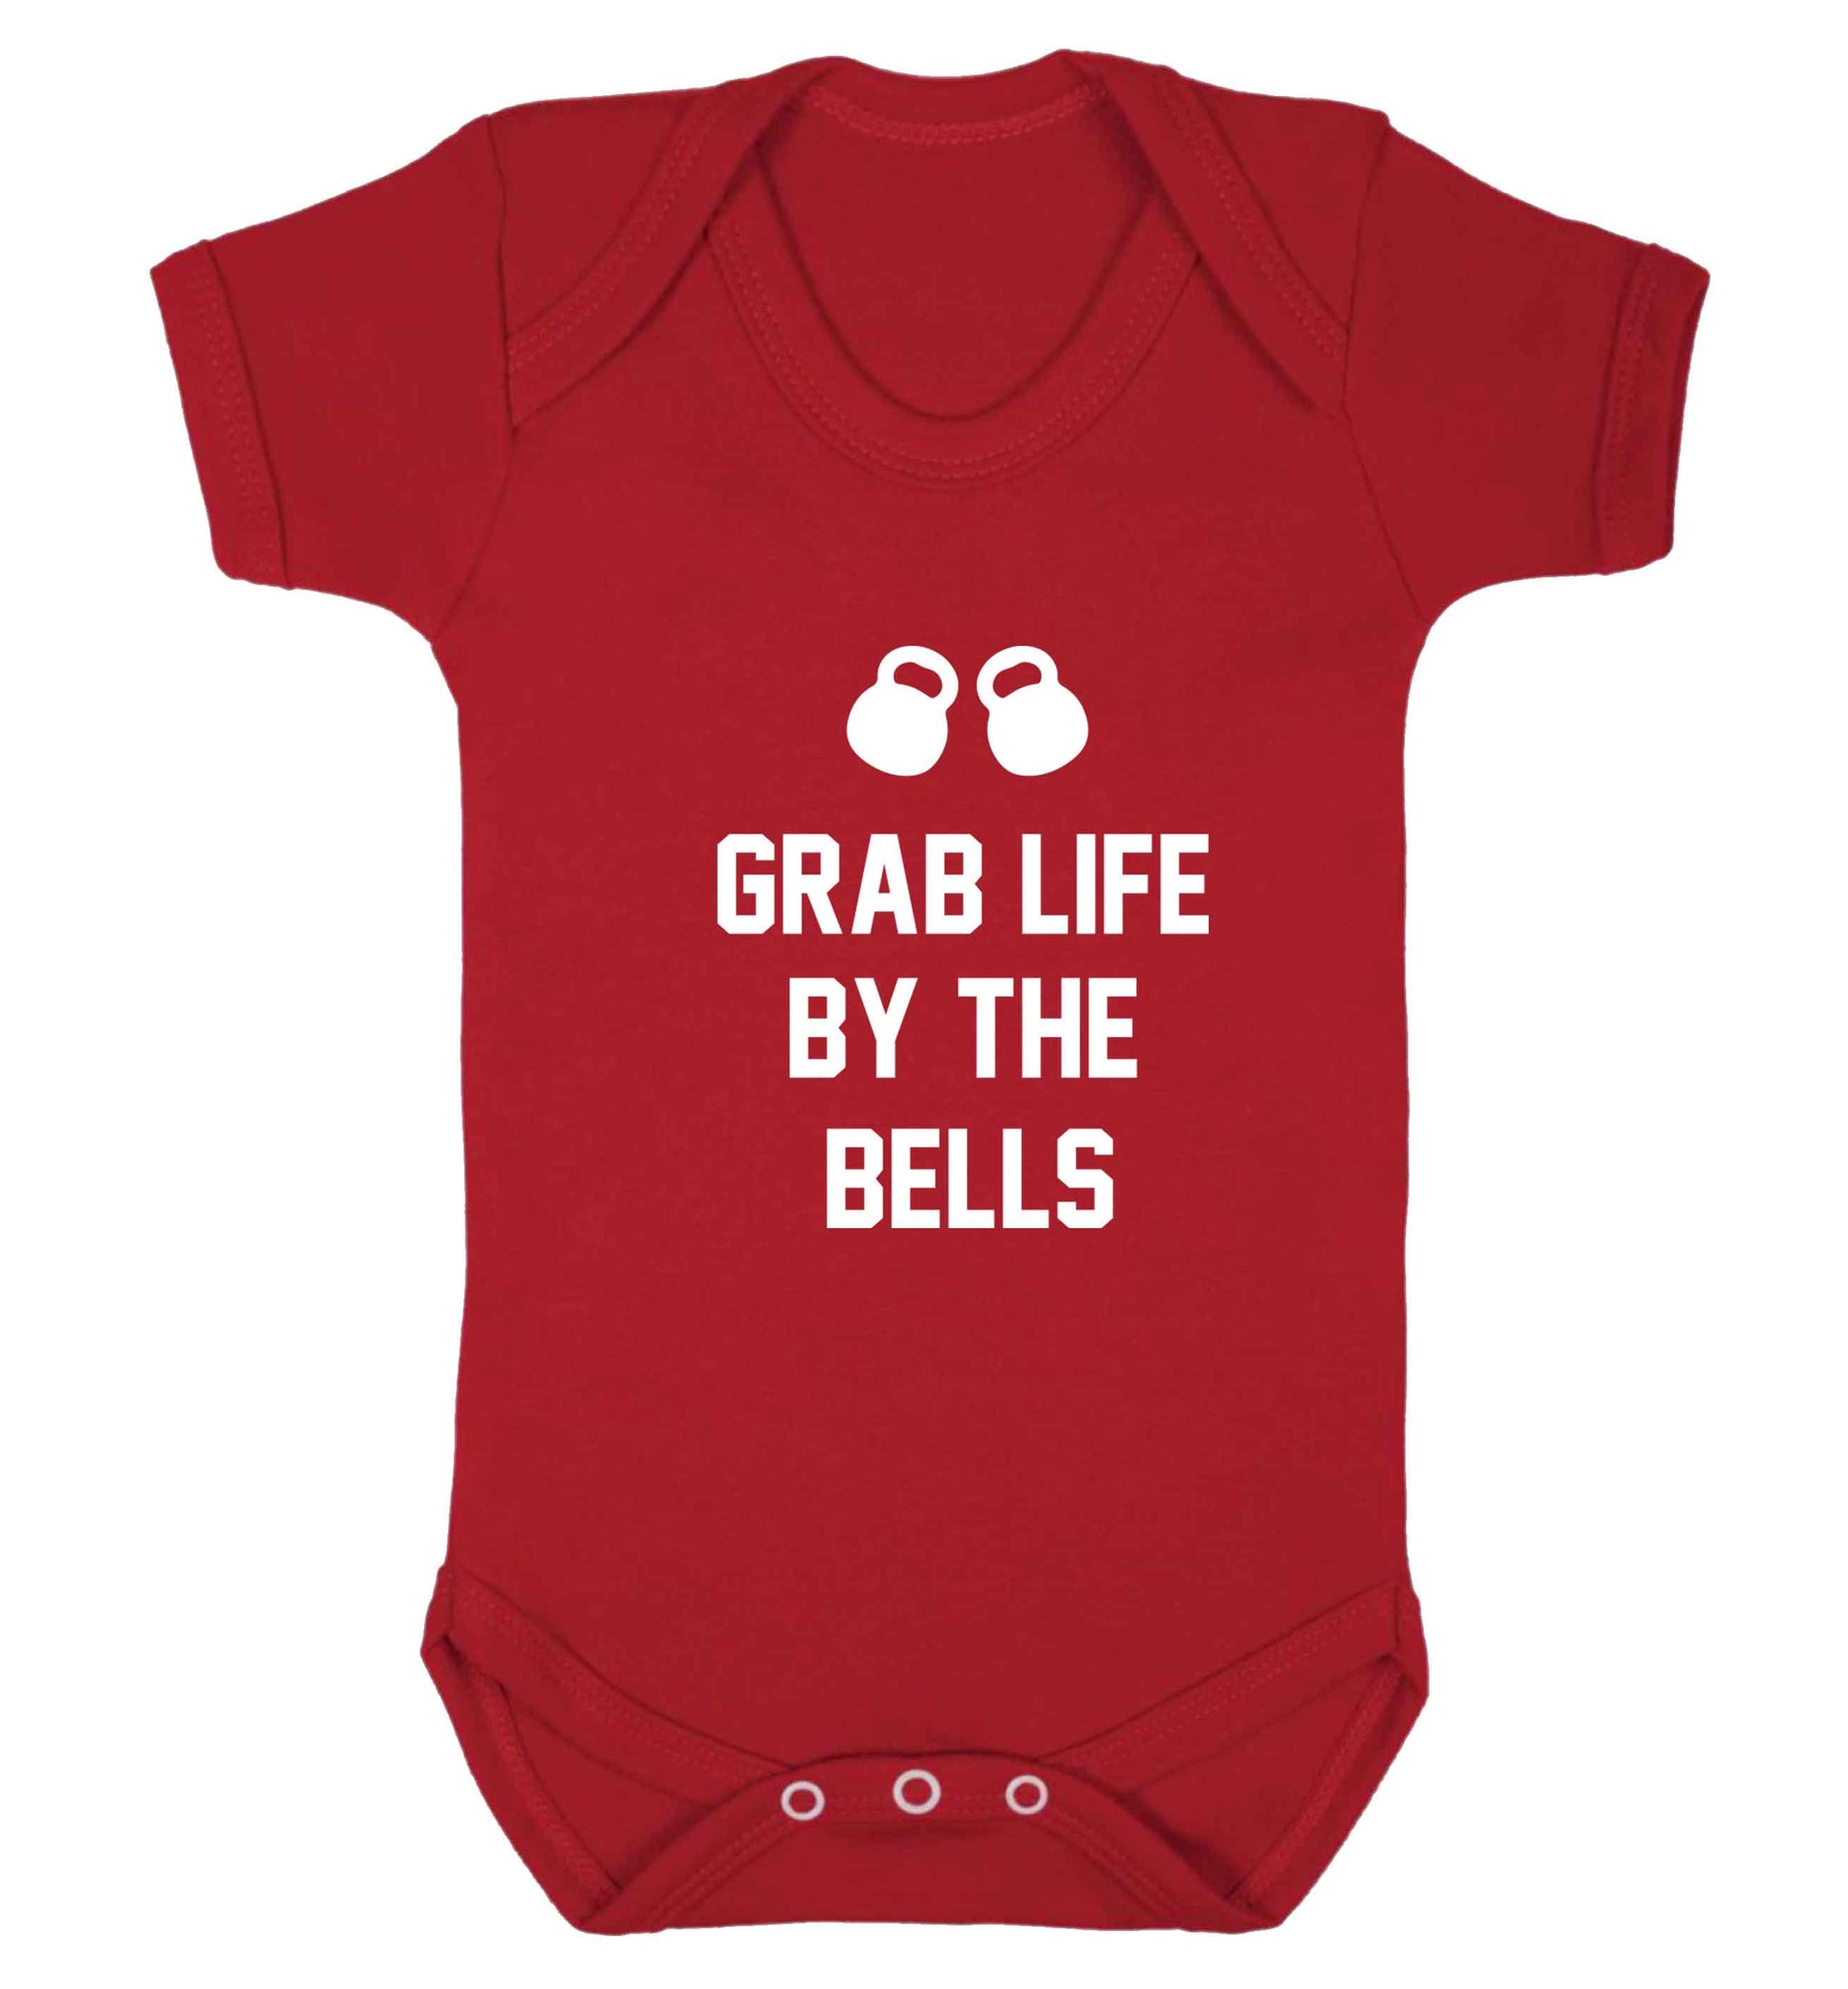 Grab life by the bells baby vest red 18-24 months